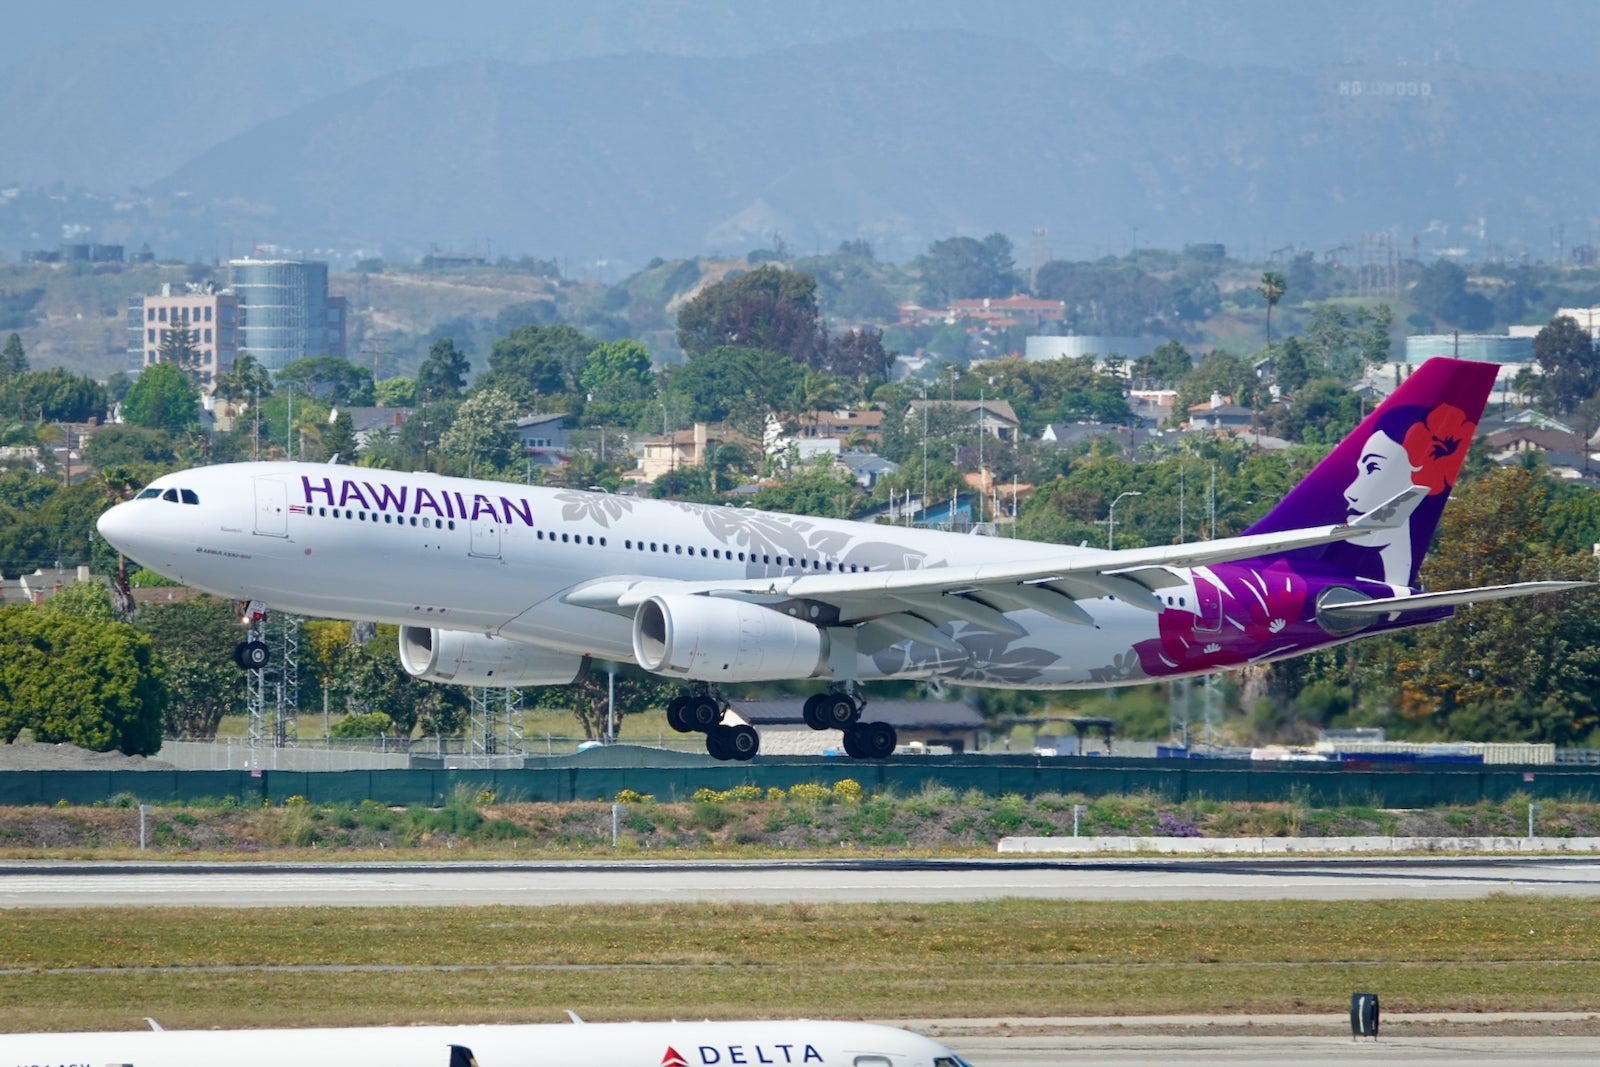 Hawaiian Airlines Airbus A330 will be offering free Starlink internet access